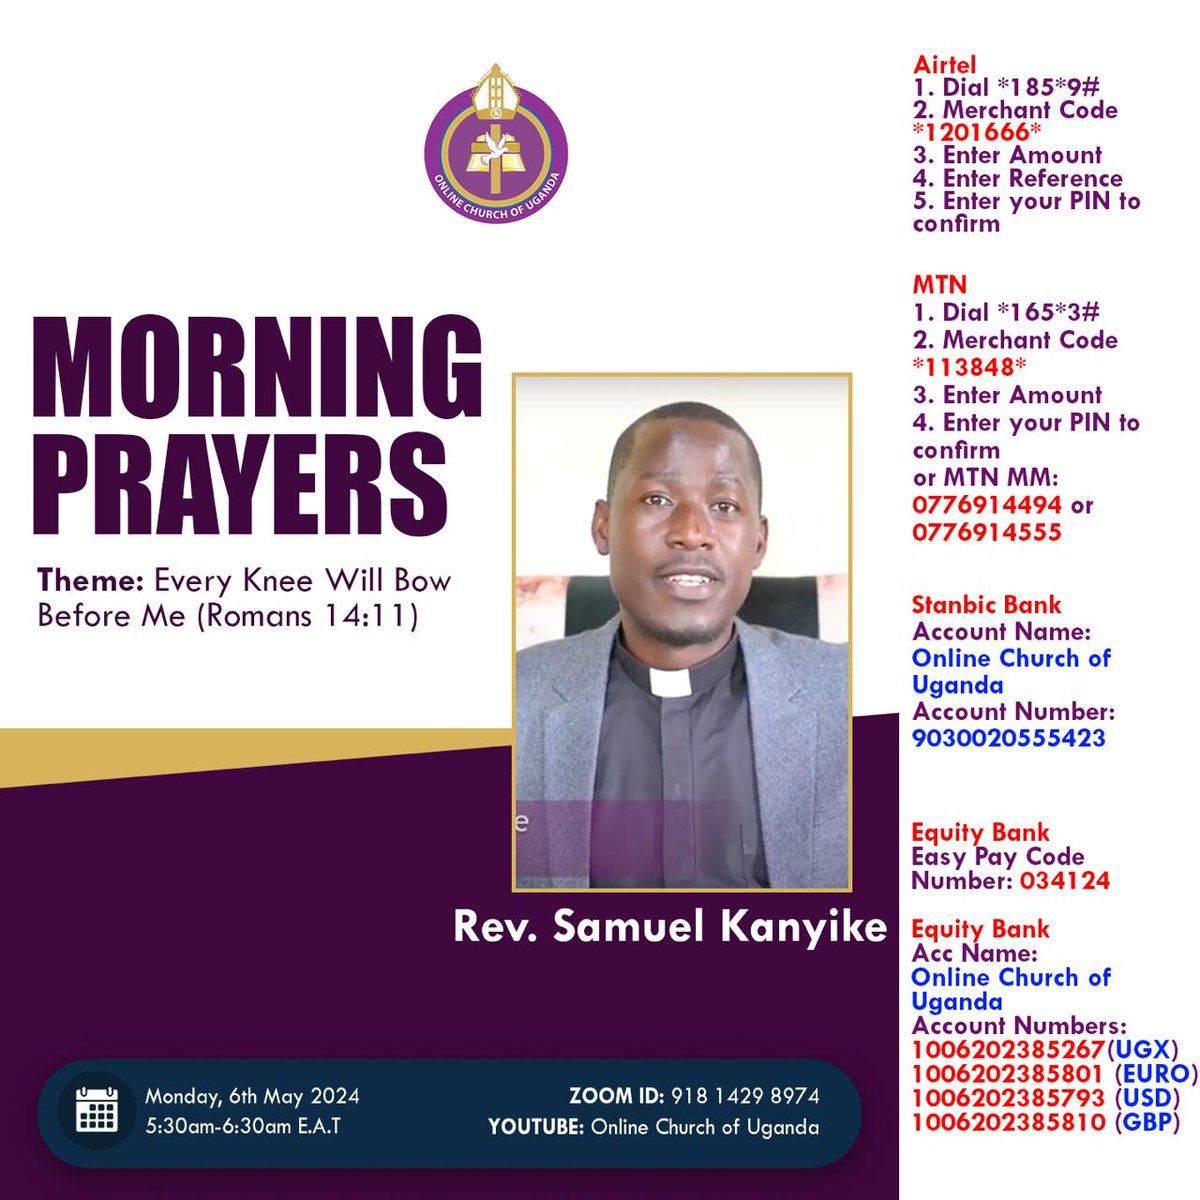 Join us for Morning Prayers with Rev Samuel Kanyika at 5:30am to 6:30am. Click on our zoom link to join.zoom.us/j/91814298974.